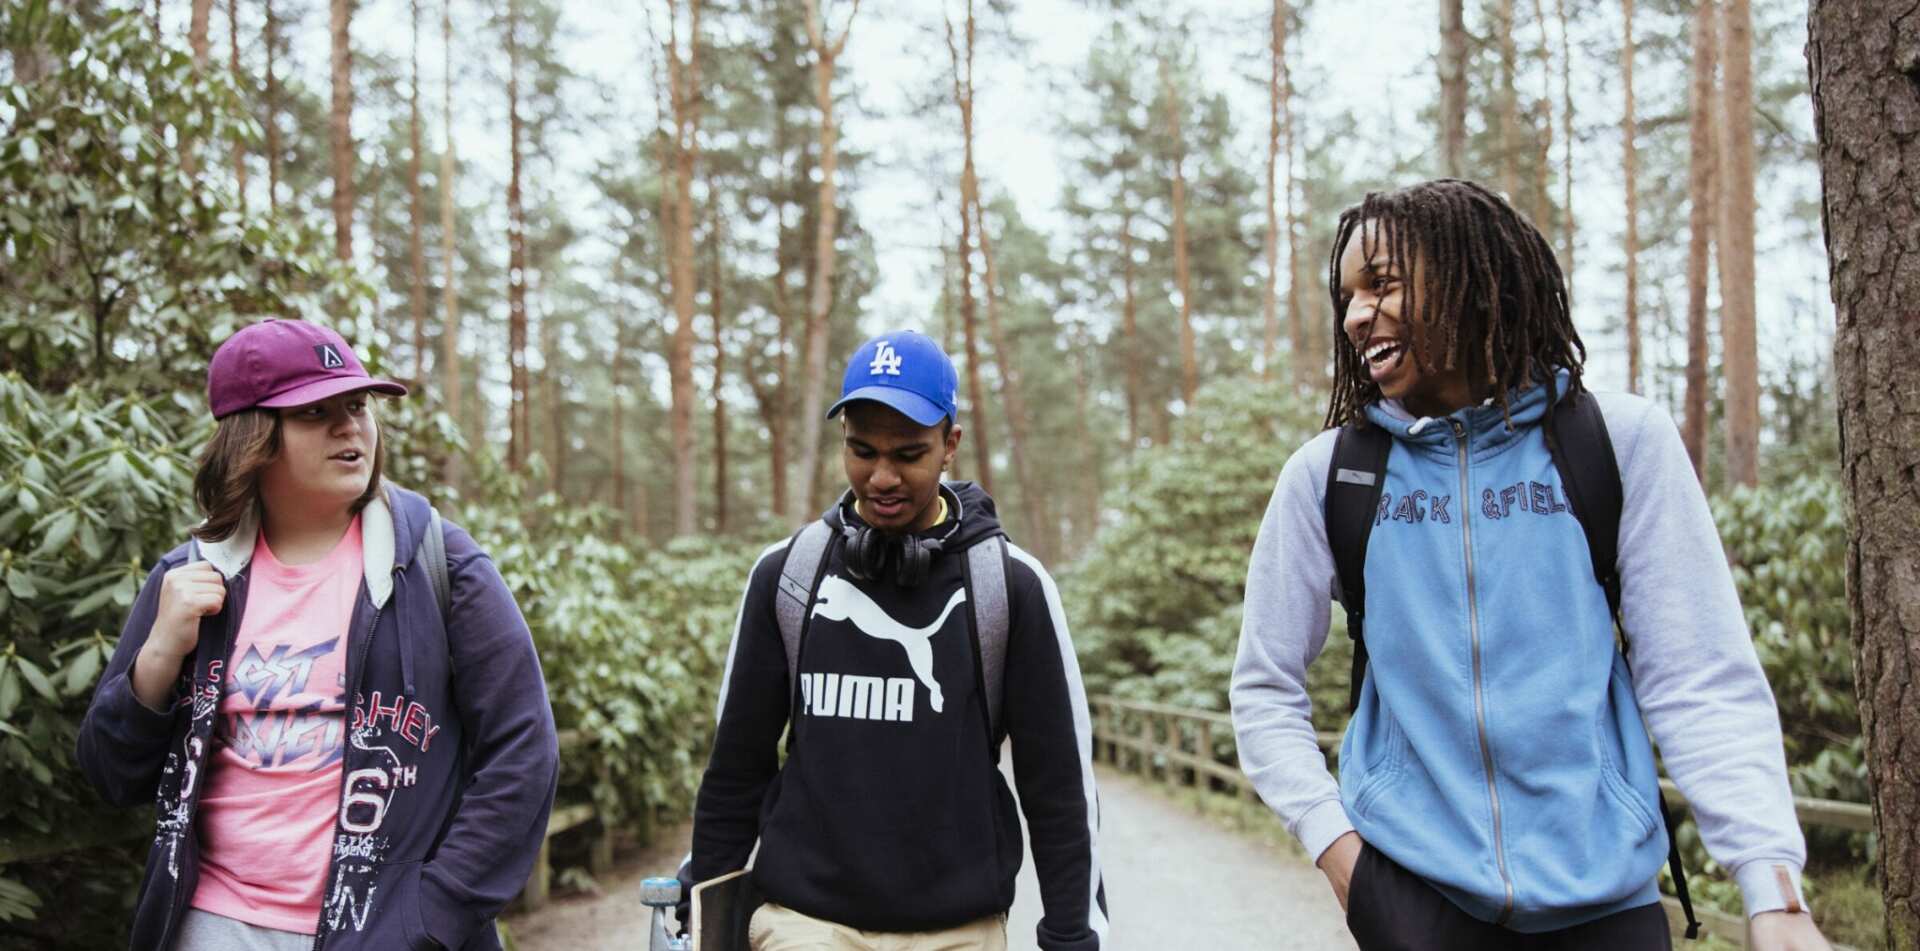 Three young people walking in nature